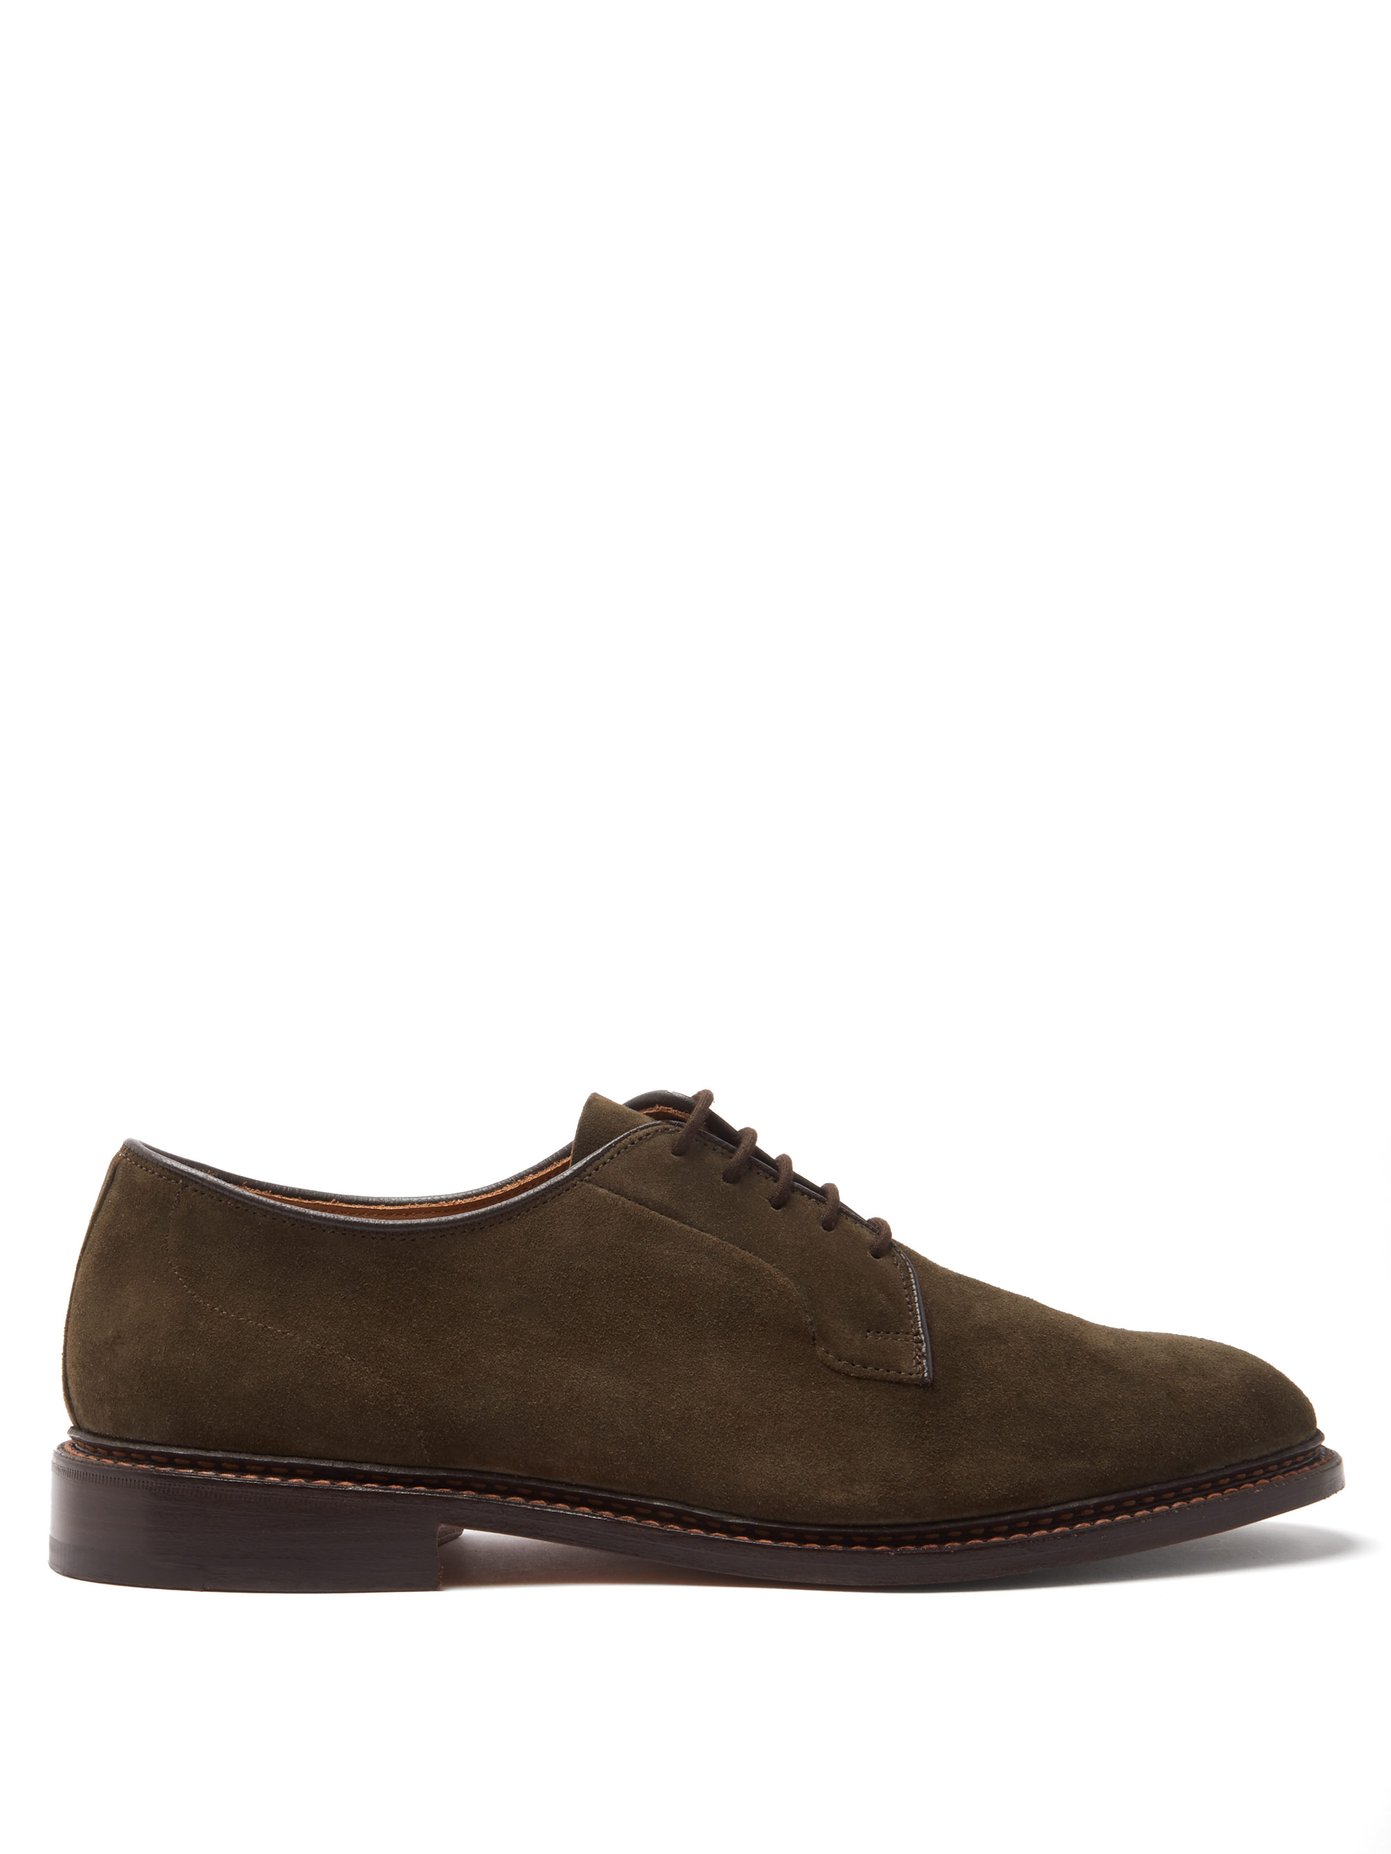 trickers suede